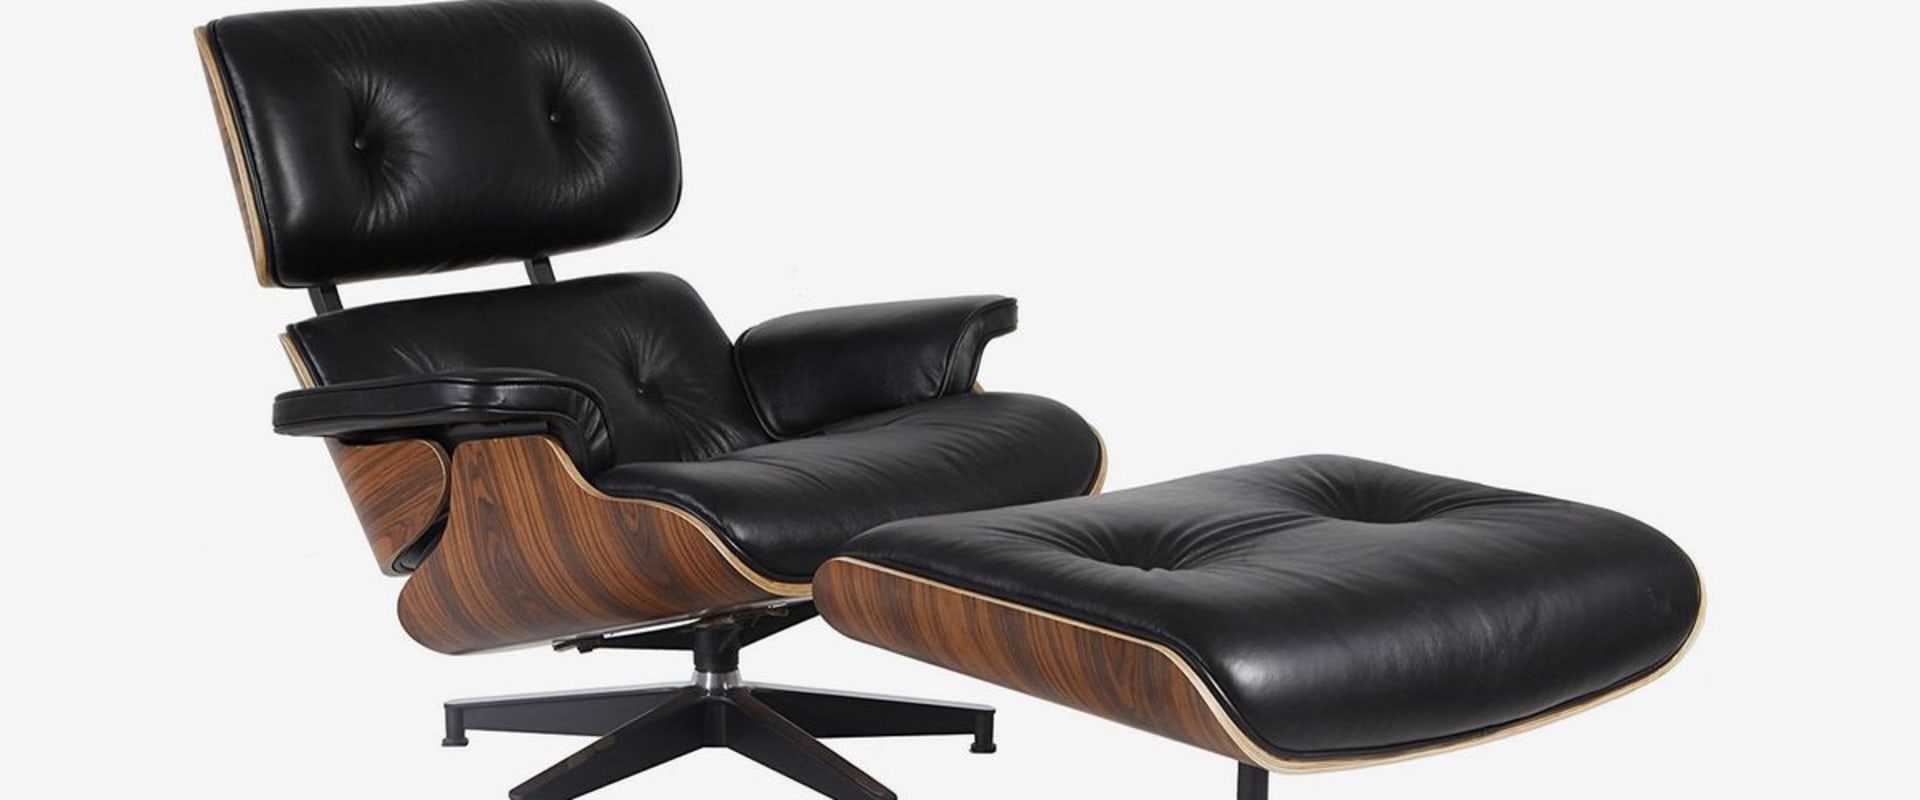 What Are the Most Comfortable Chairs to Relax In?